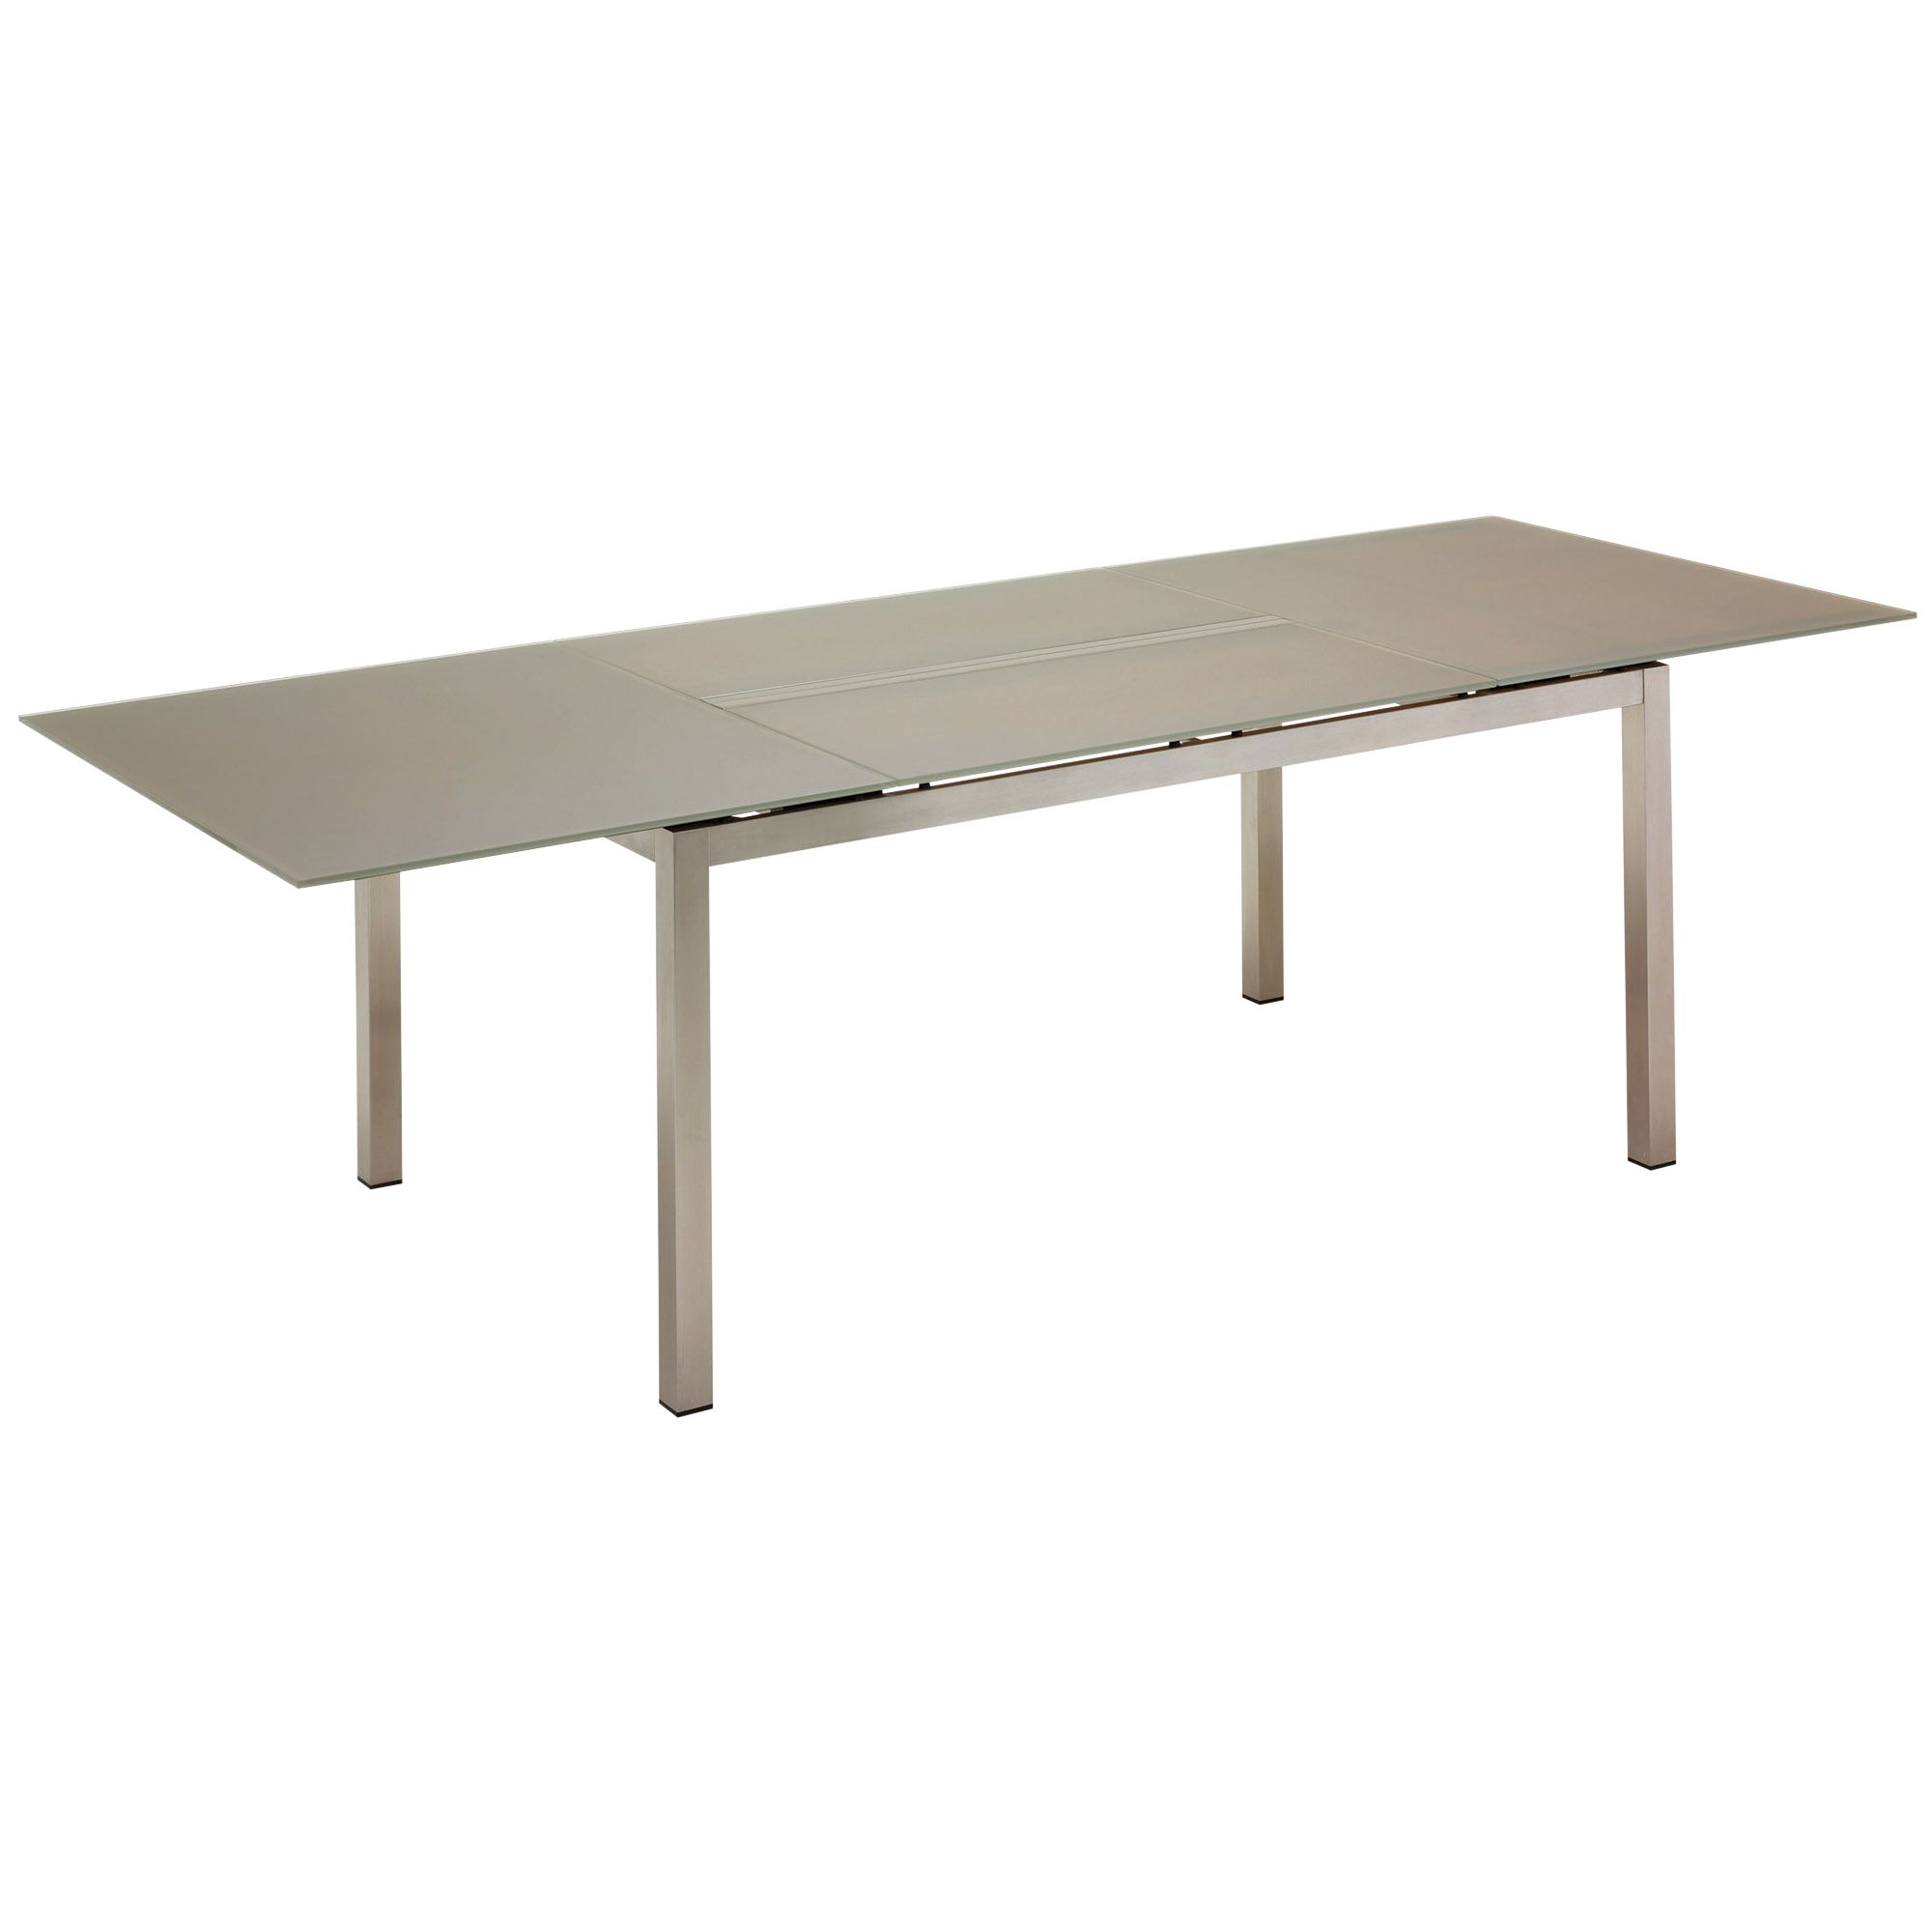 Gloster Kore Rectangular 8-10 Seater Extending Outdoor Dining Table with Glass Top, Taupe